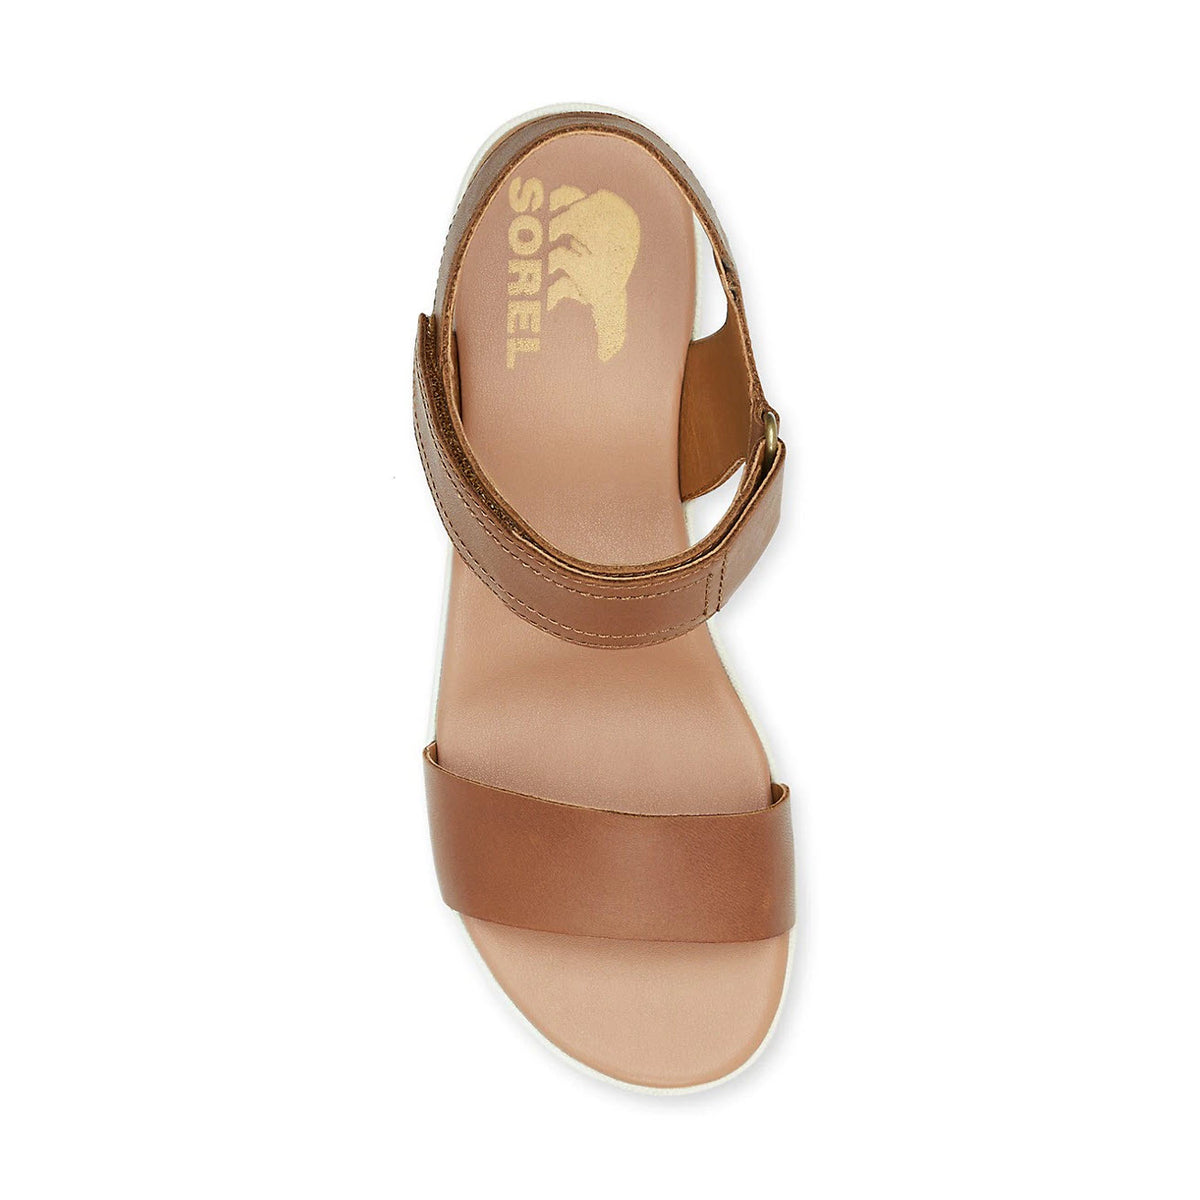 Top view of a Sorel Cameron Wedge sandal in Velvet Tan with a hook and loop closure on a white background.